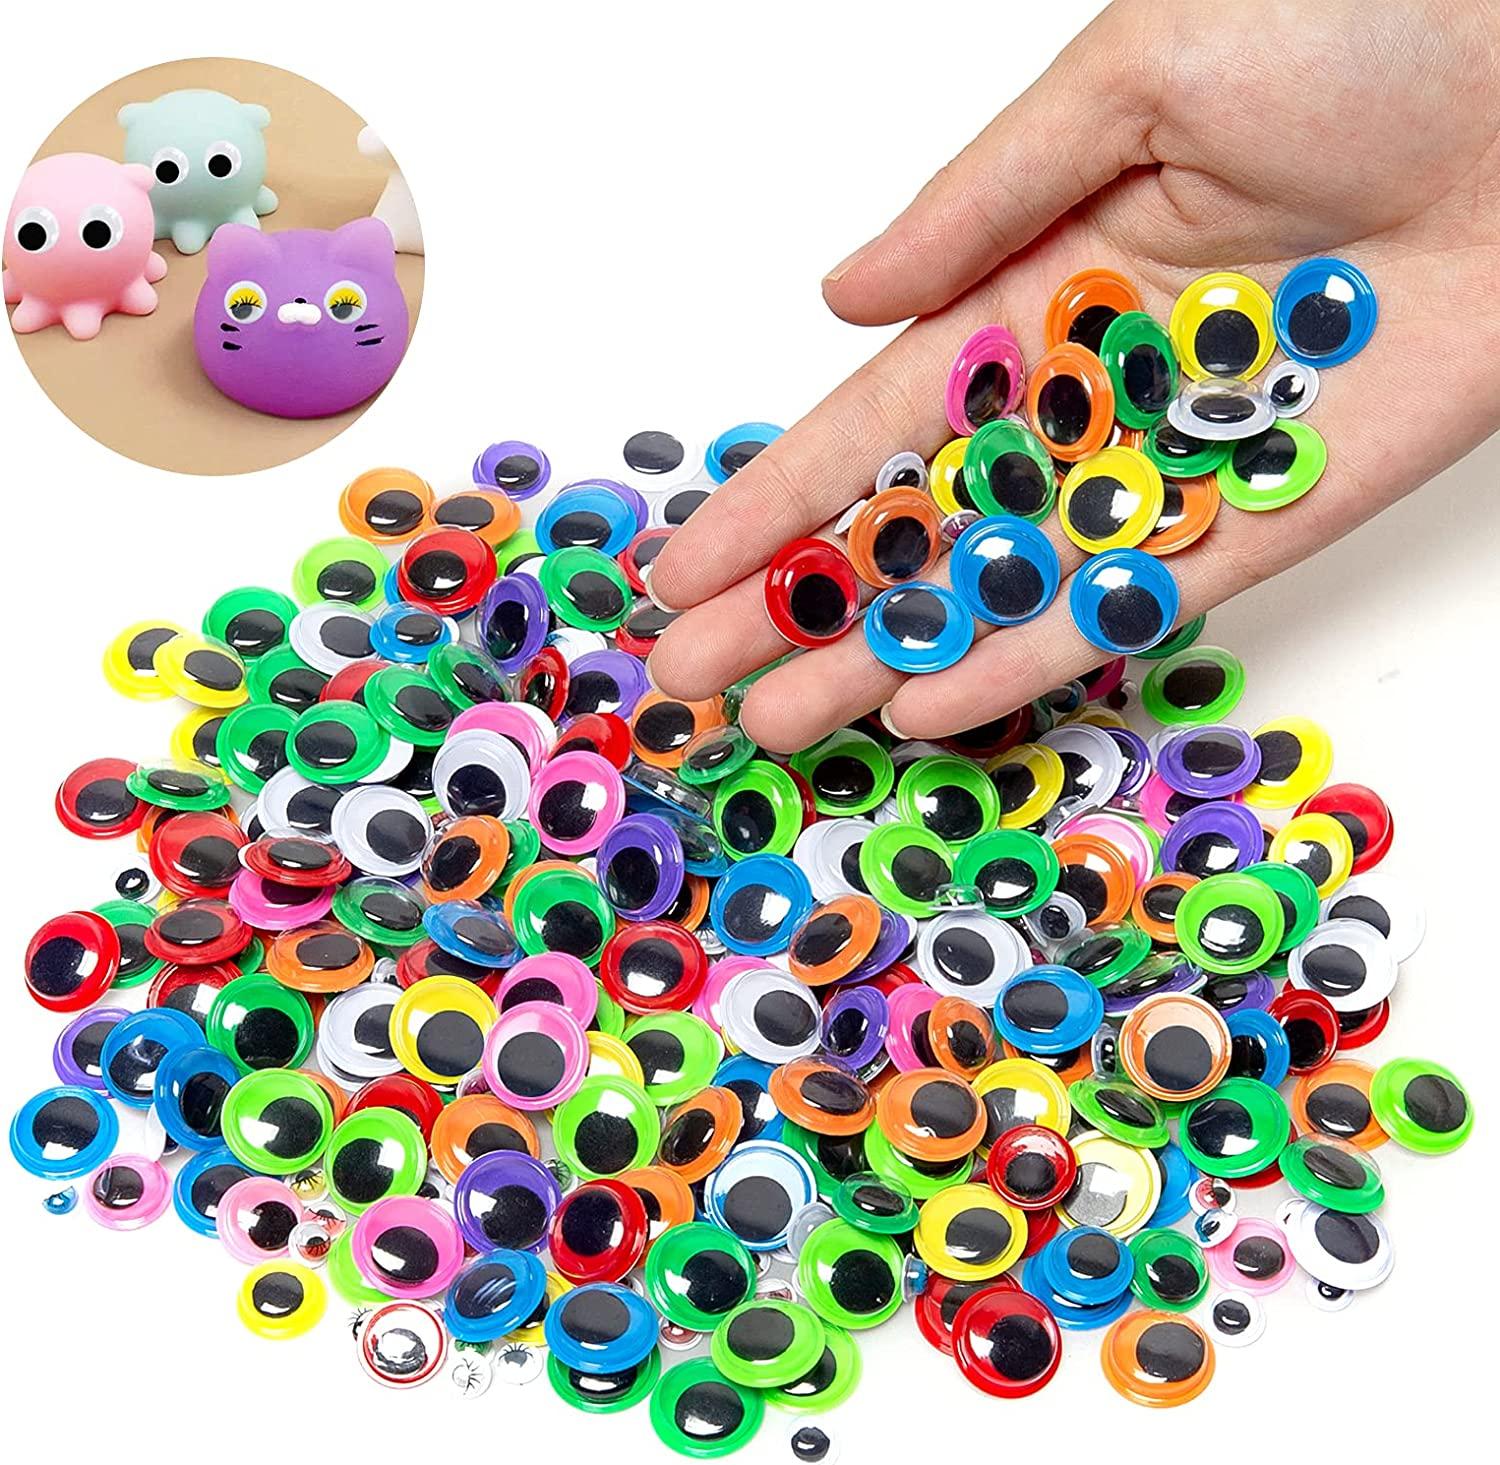 EconoCrafts: Colored Googly Eyes Stickers